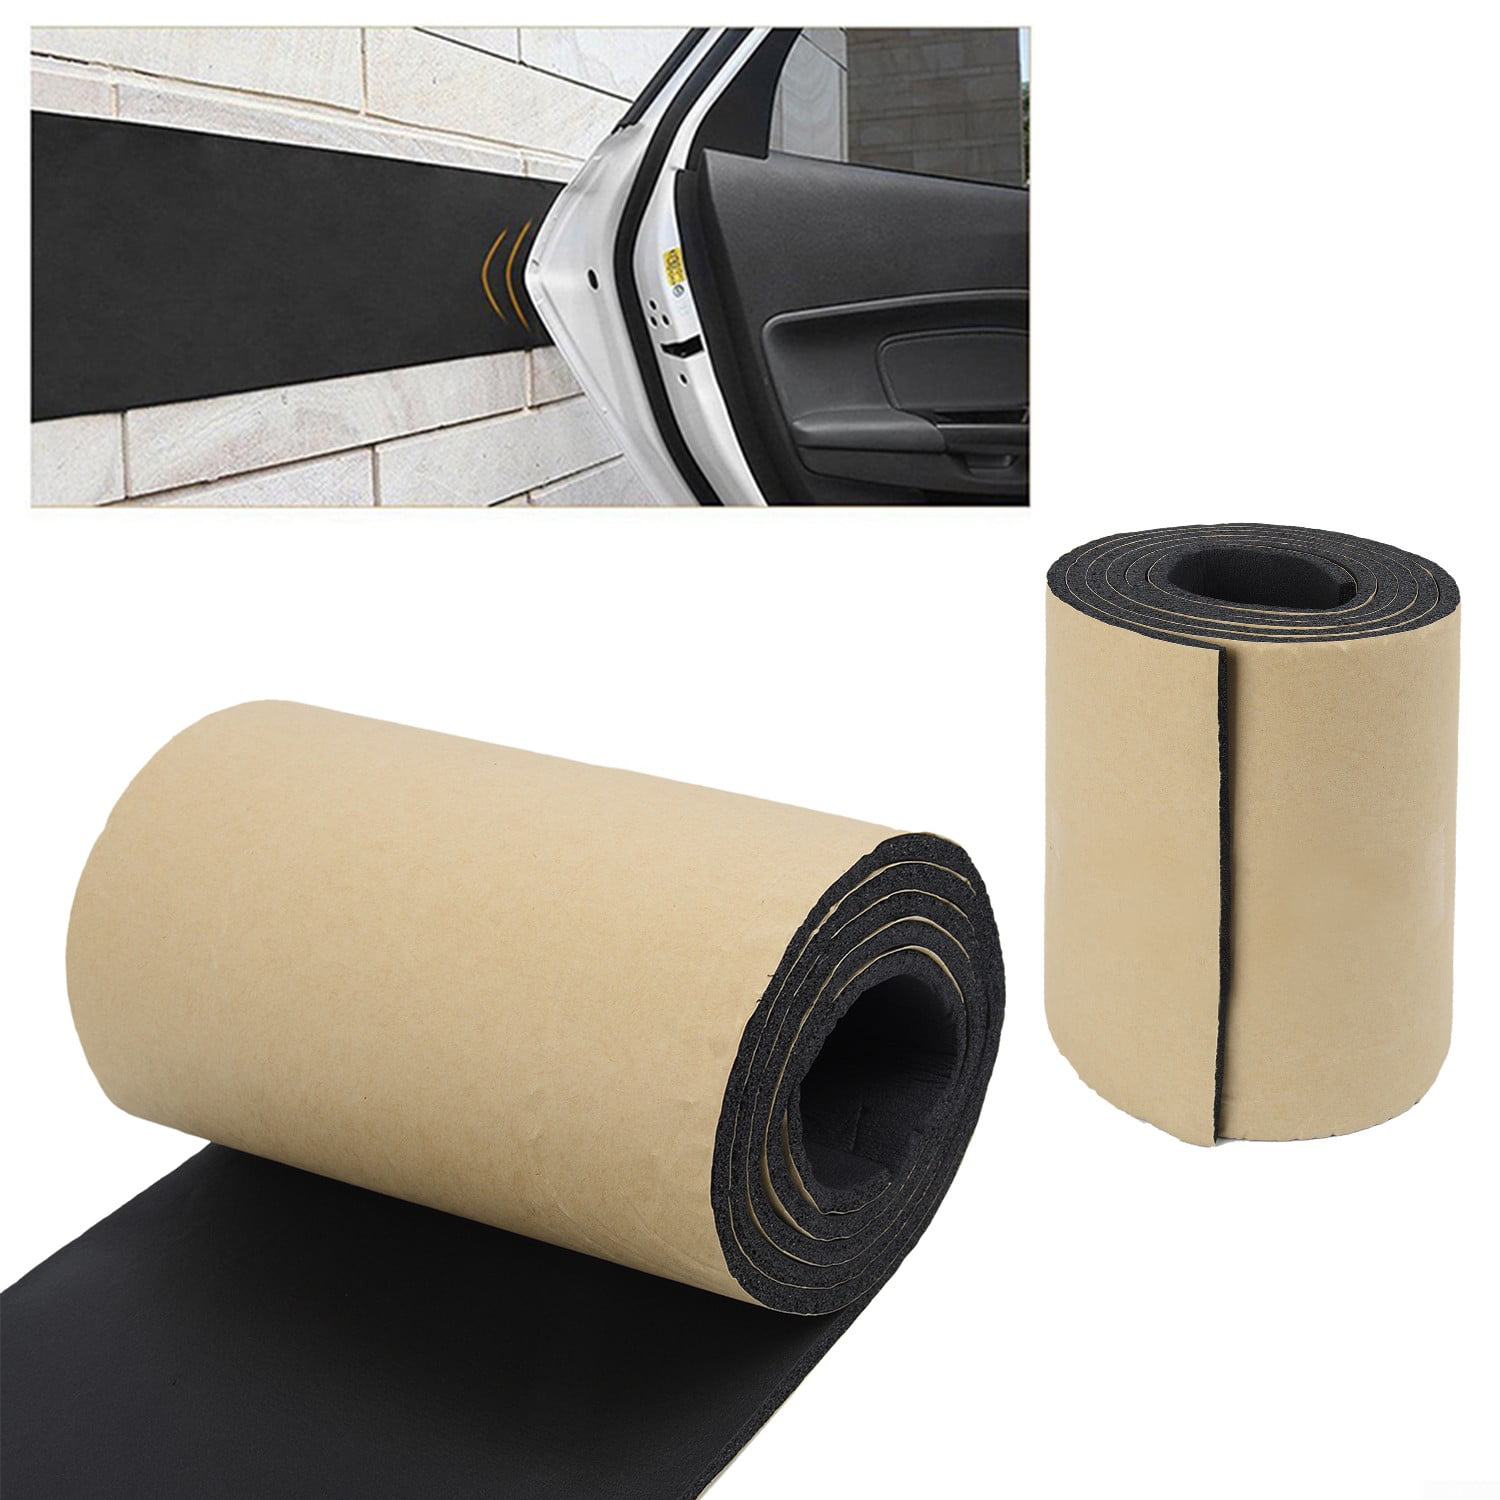 Details about   Garage Wall Protector Self Adhesive Foam Parking Thick Car Door Bumper Guard 2m 